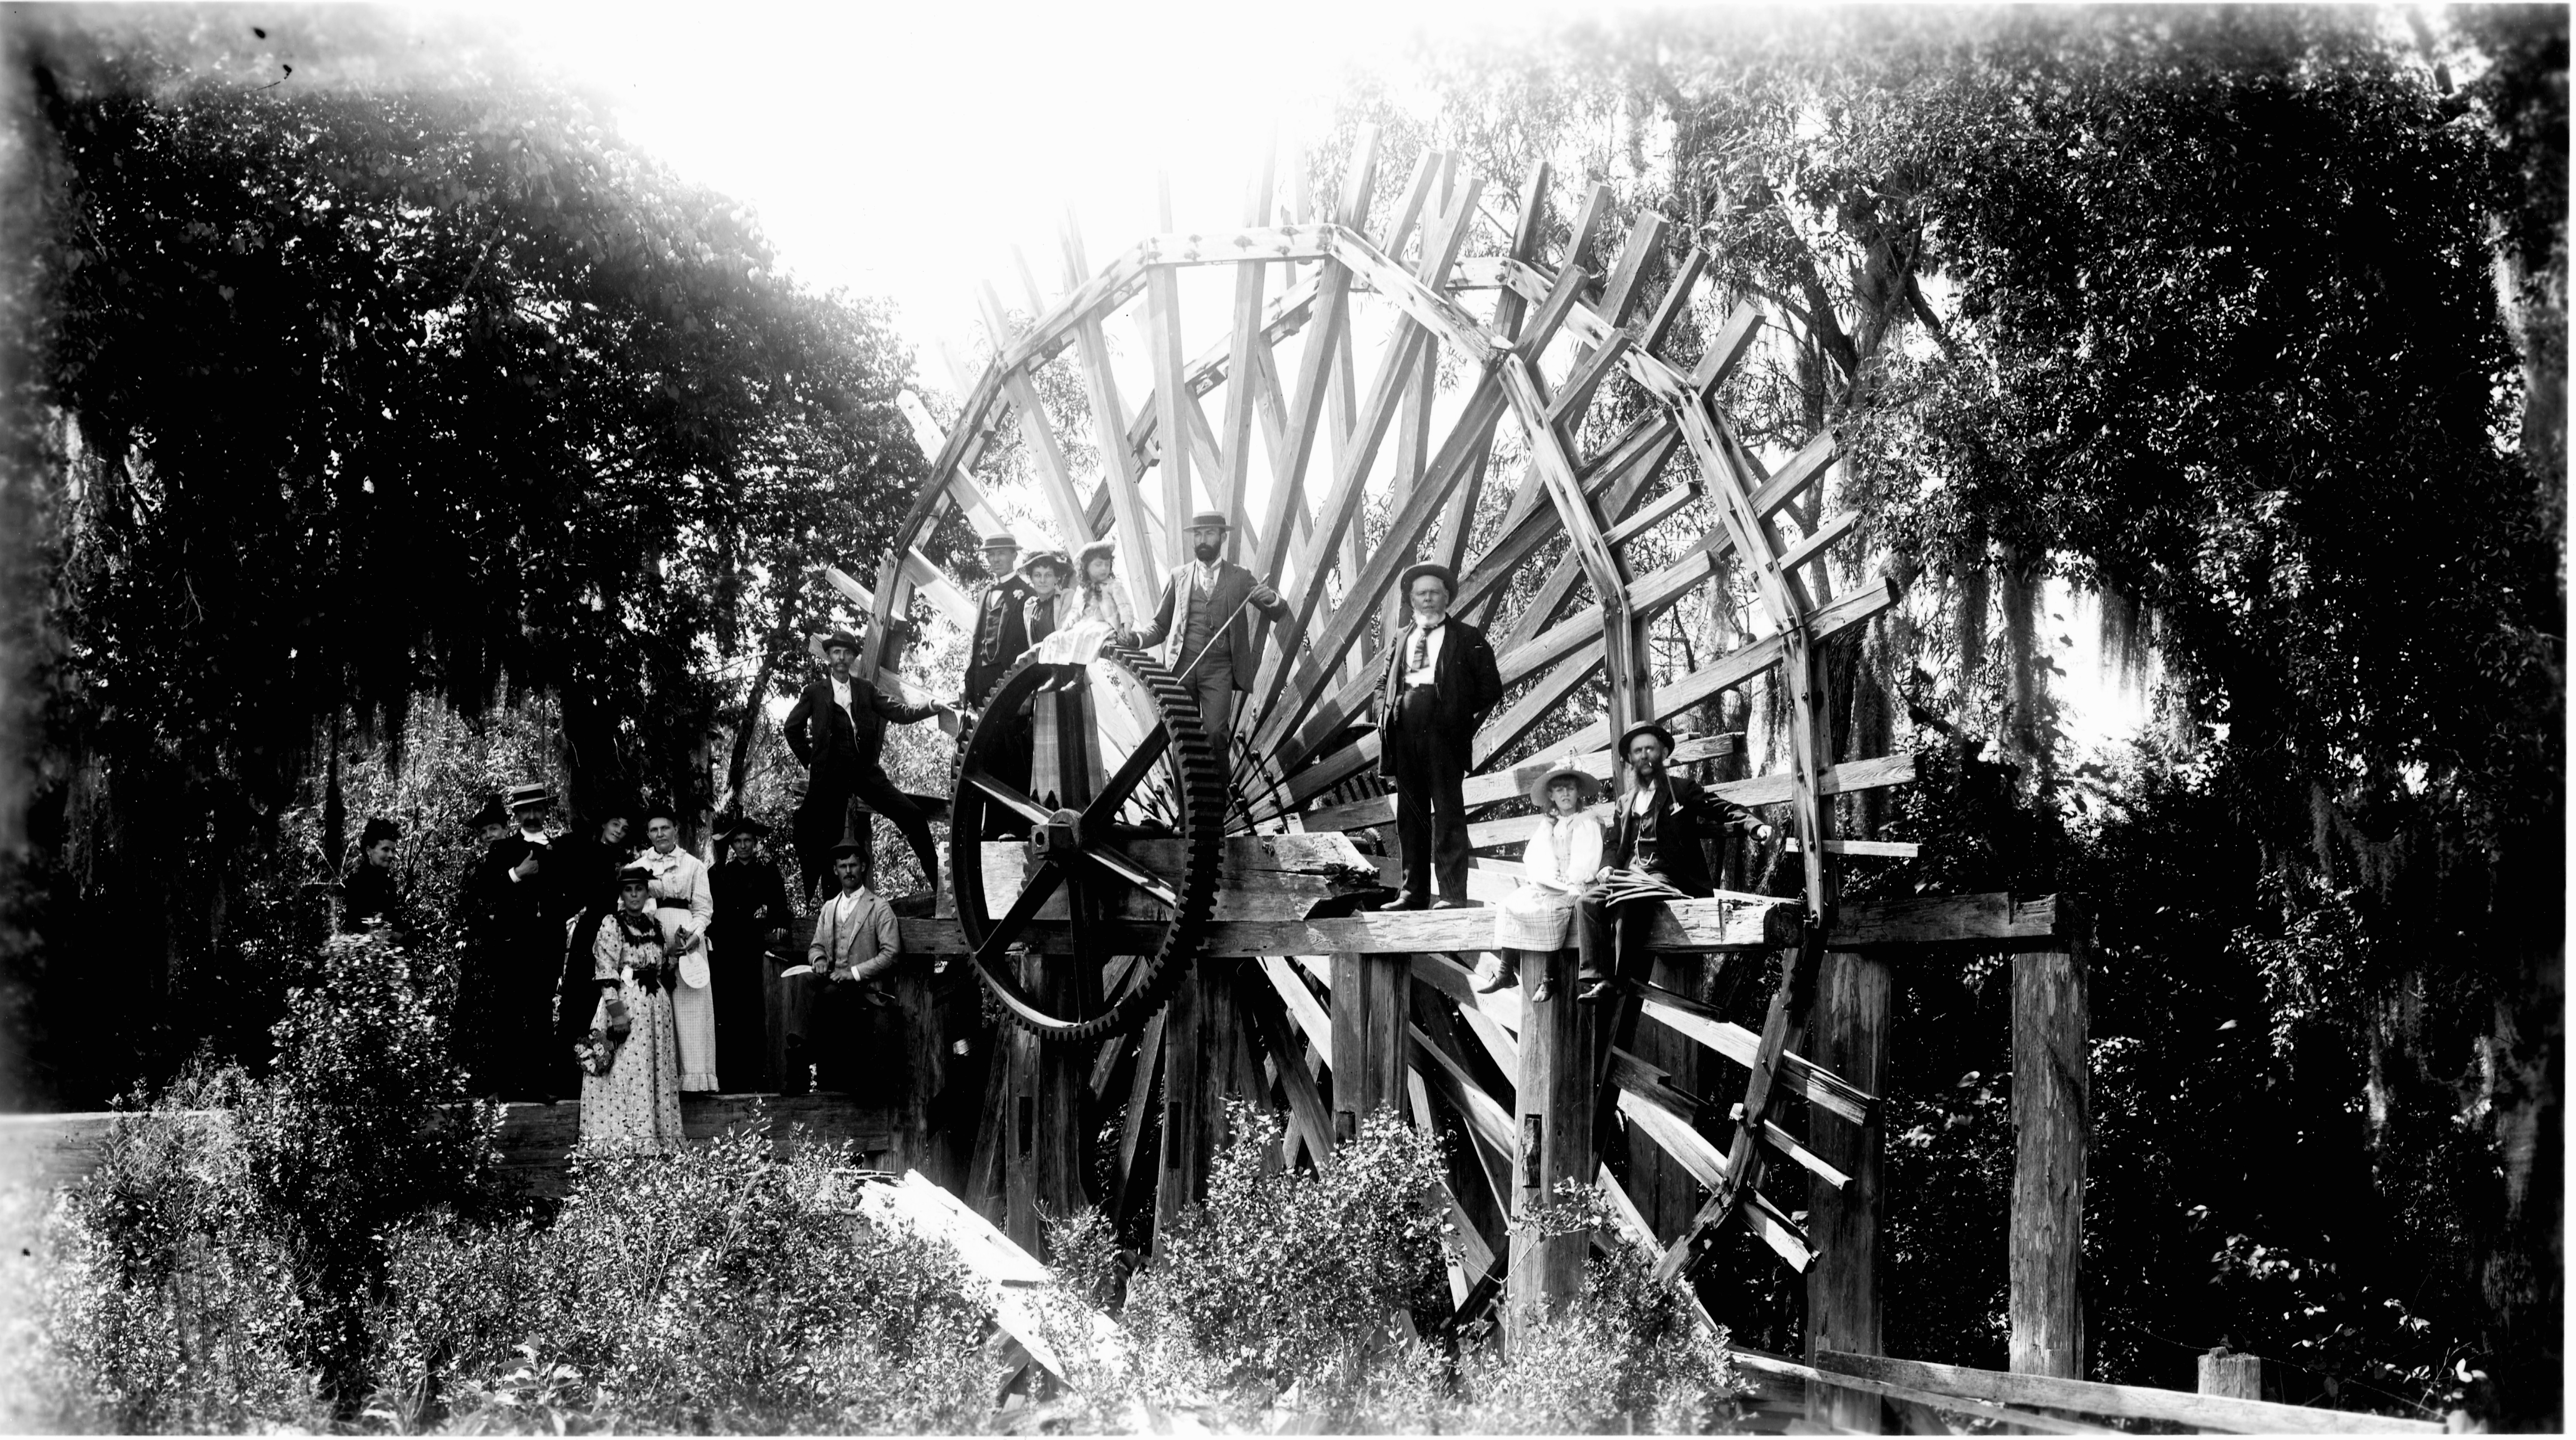 Black and White photo of people standing on the De Leon Springs sugar mill wheel